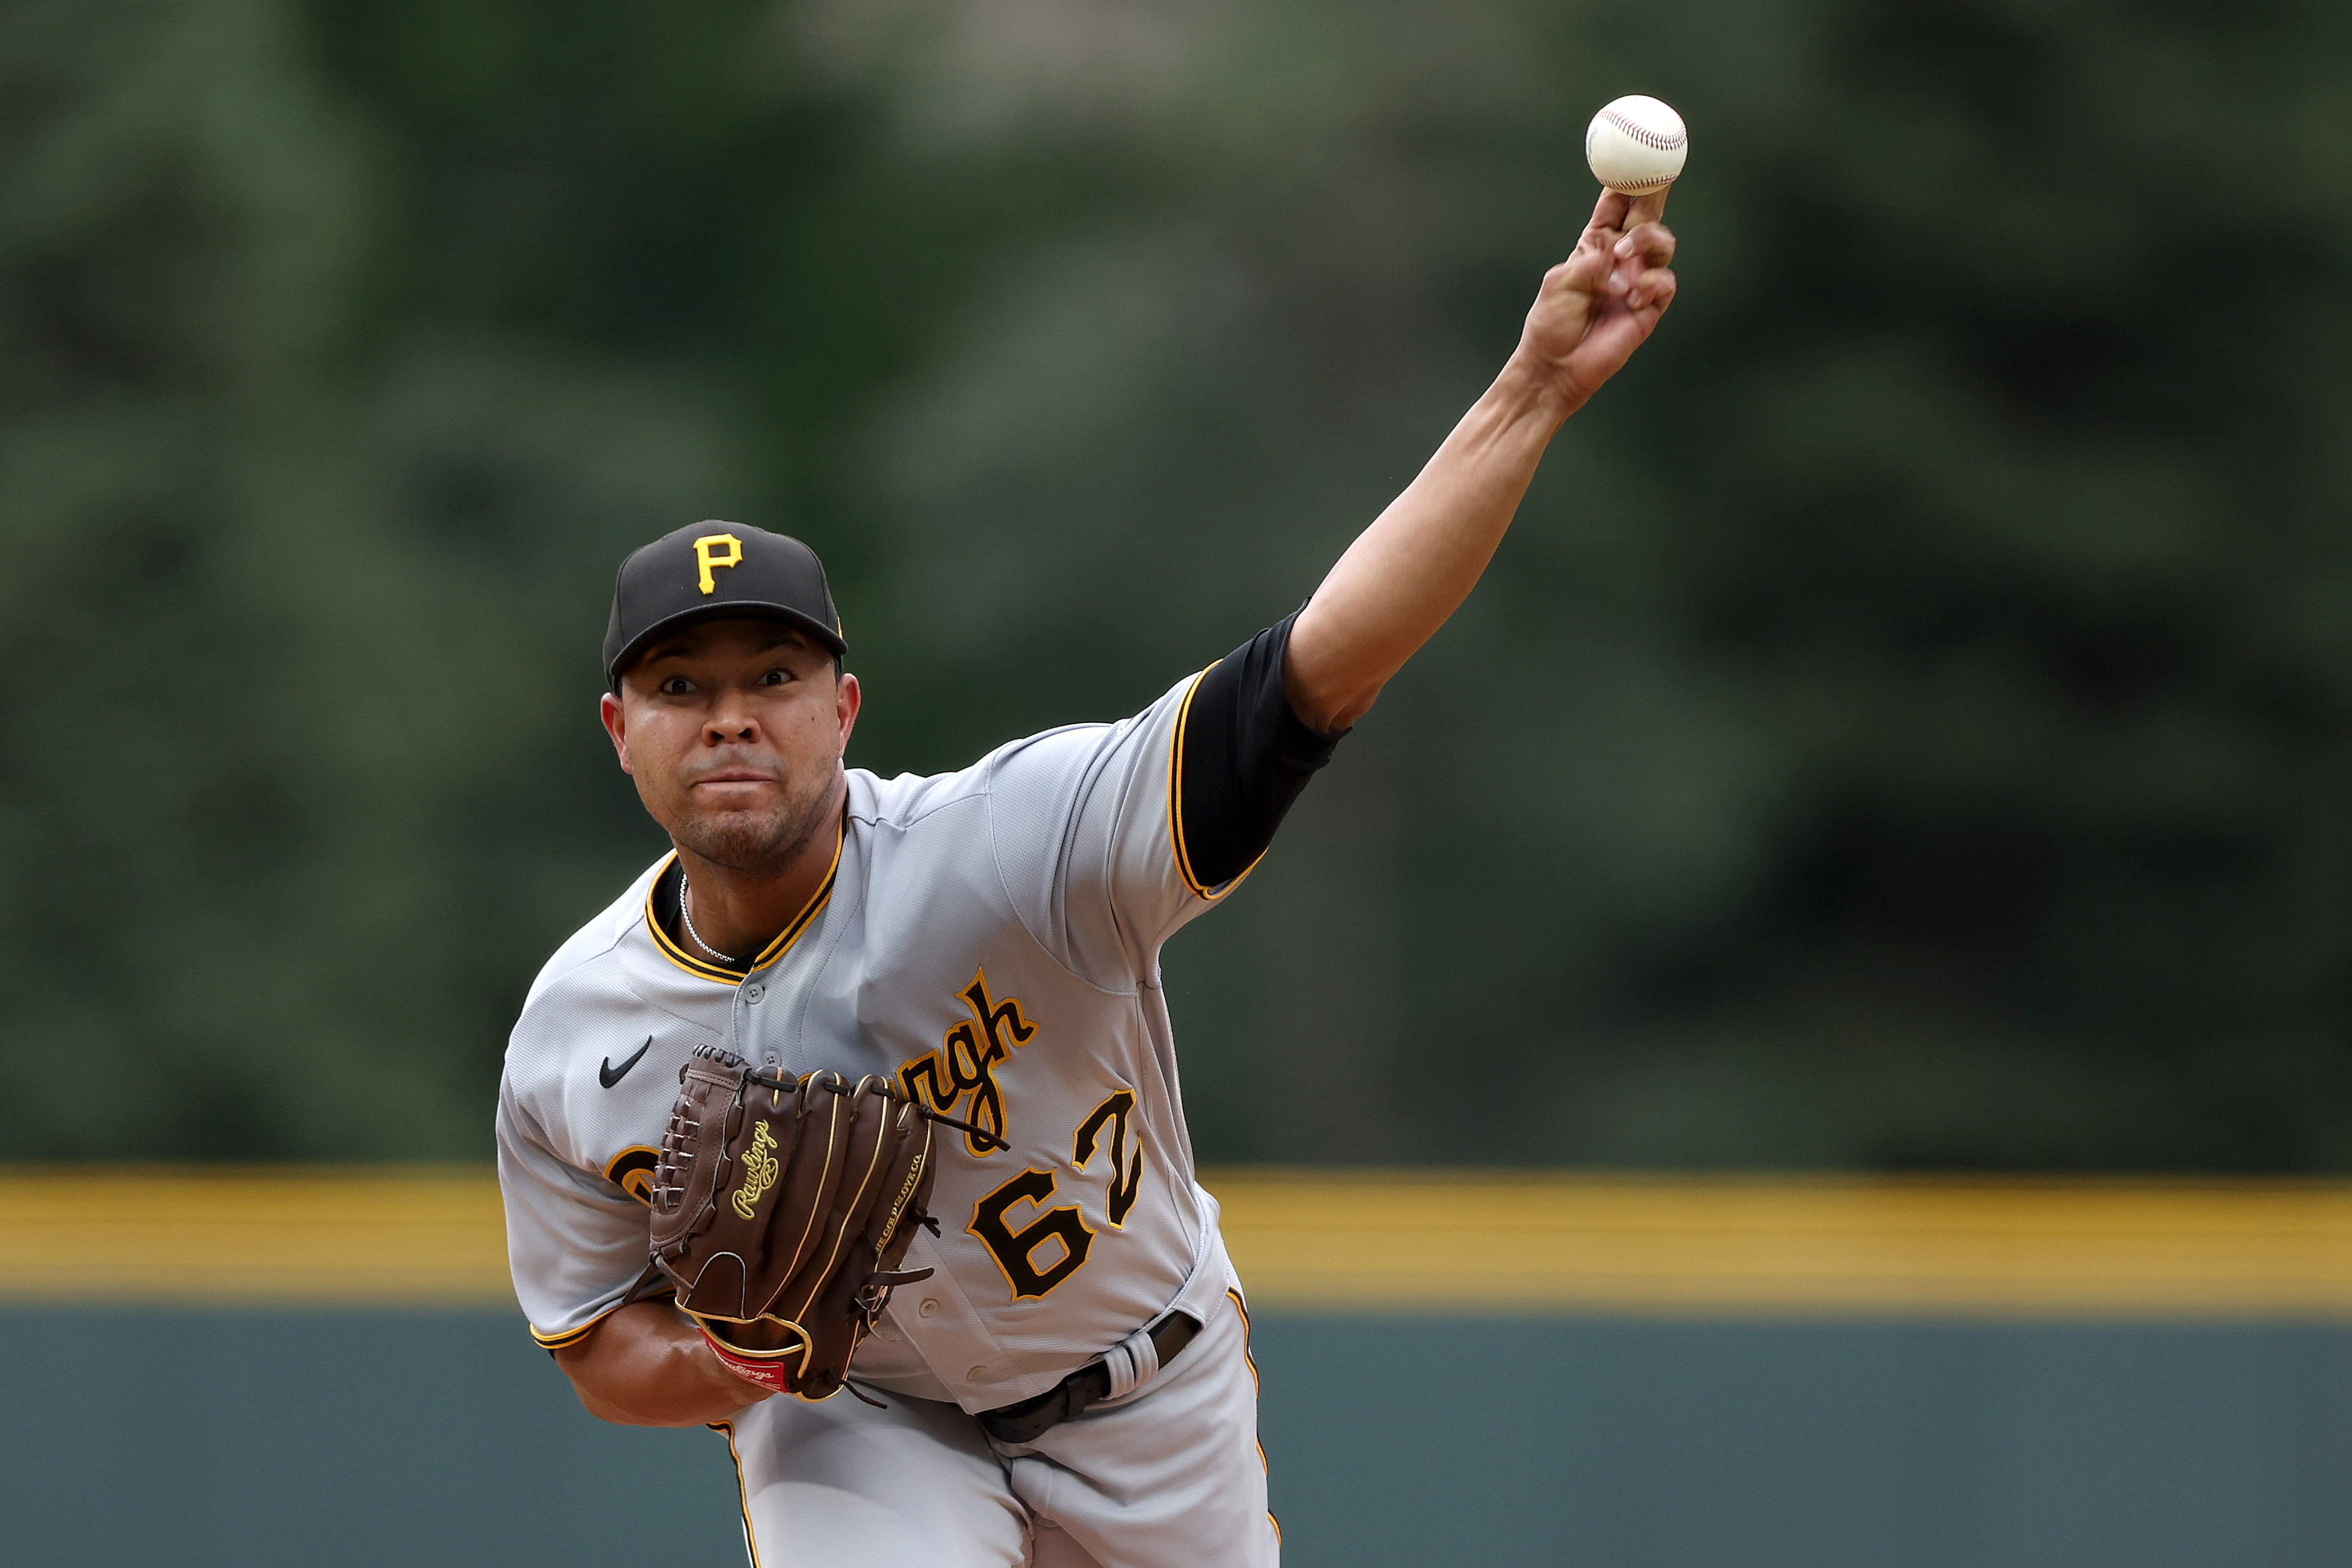 Starting pitcher Jose Quintana #62 of the Pittsburgh Pirates throws against the Colorado Rockies in the first inning at Coors Field on July 15, 2022 in Denver, Colorado.